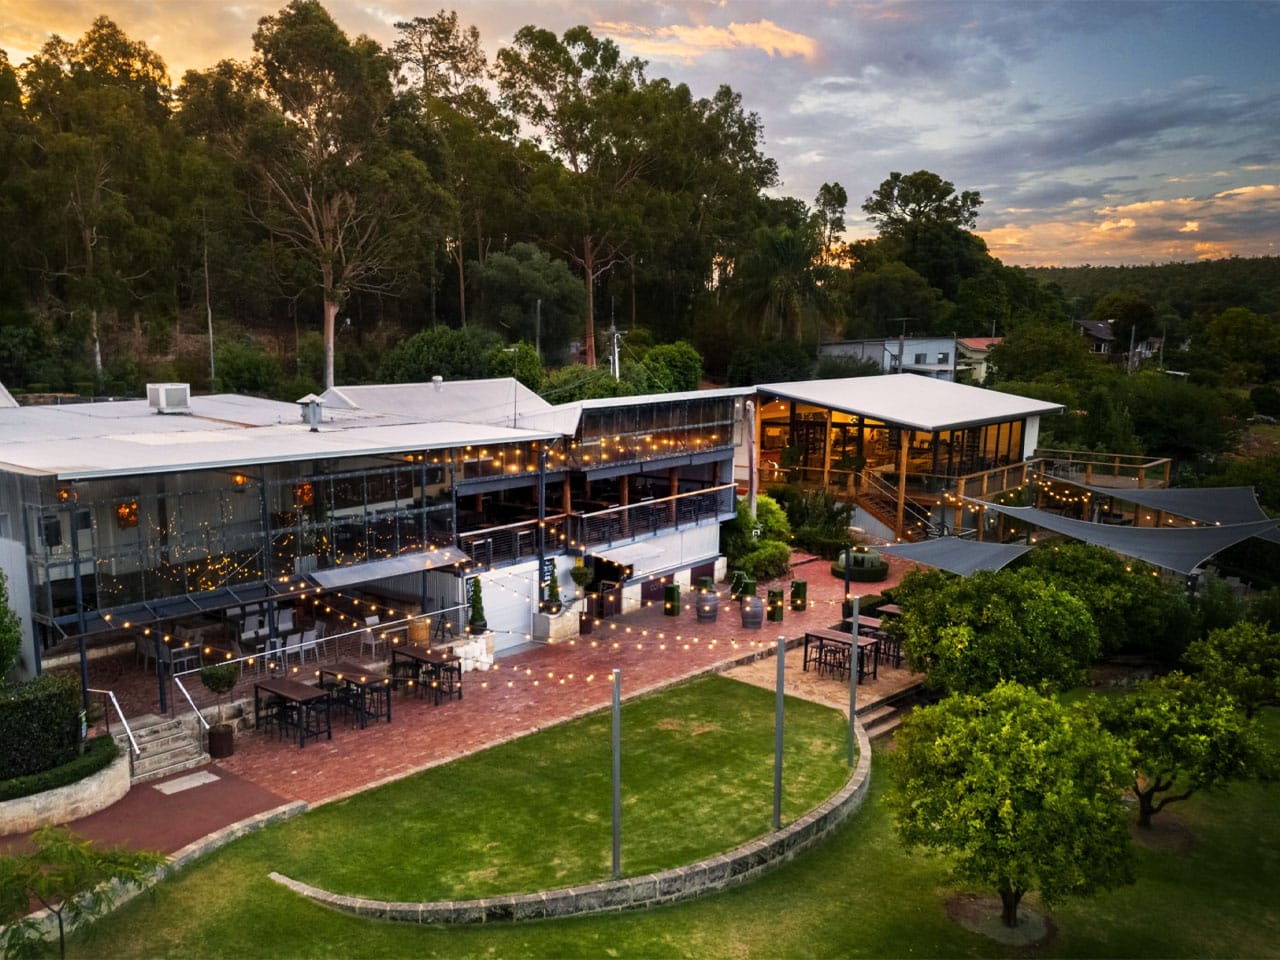 Aerial view of Core Cider House at dusk with lights